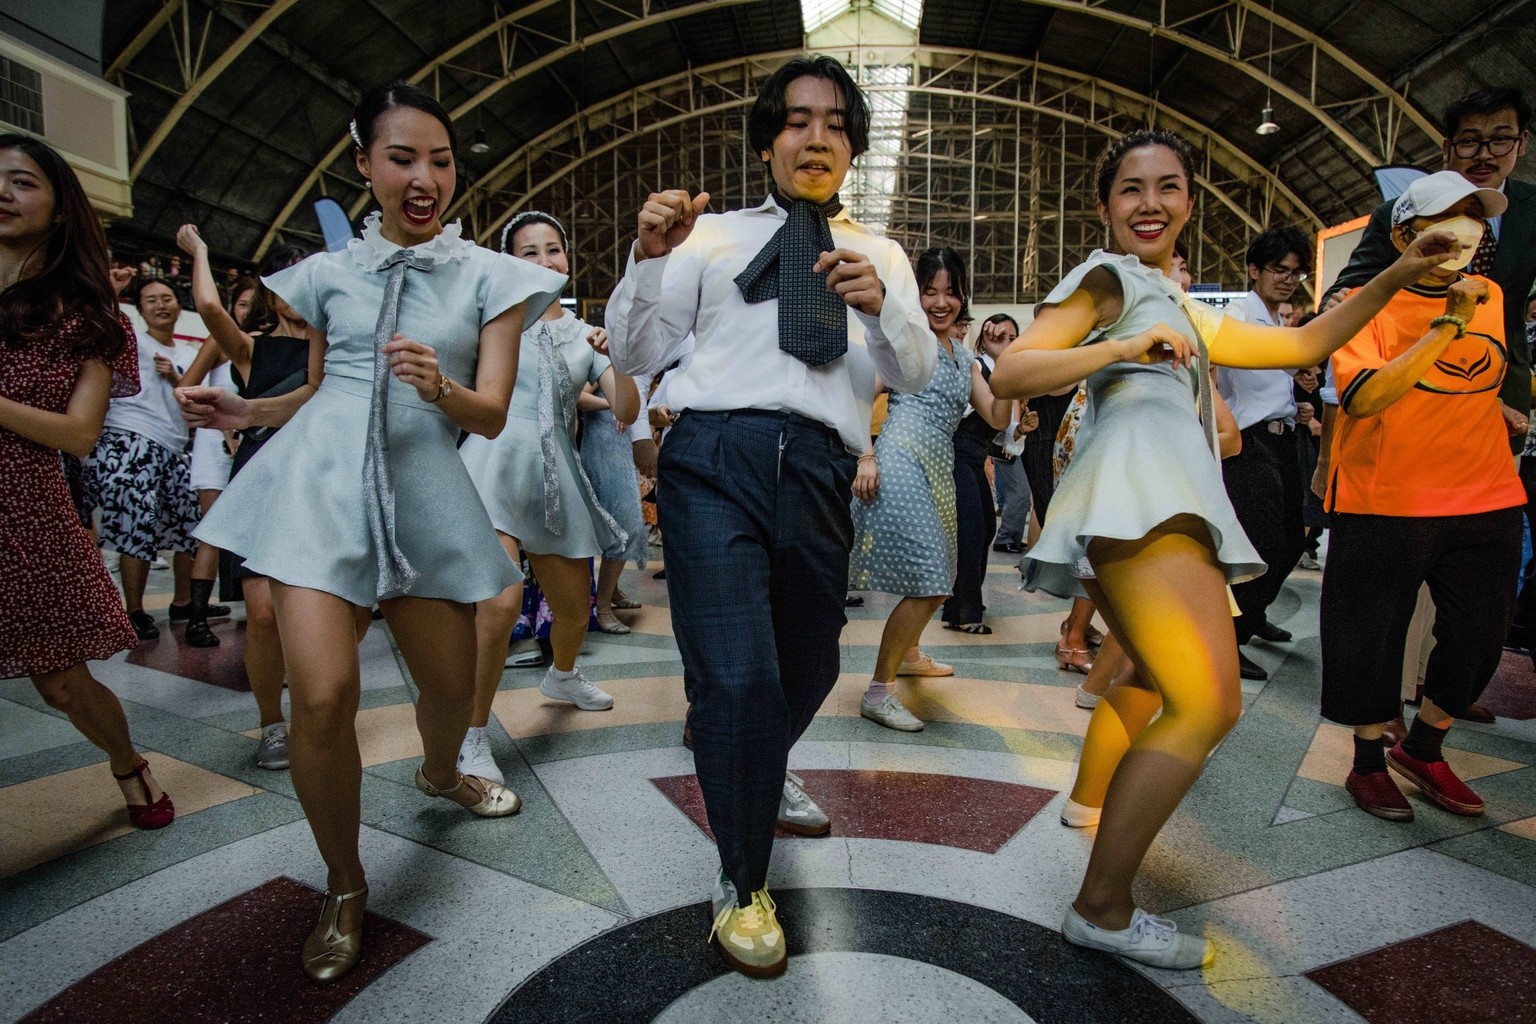 August 19, 2023, Bangkok, Bangkok, Thailand: August,19 2023,People swing dancing during a vintage-themed swing dance party at Hua Lamphong railway station in Bangkok. Hundreds of Thai and foreign danc ...